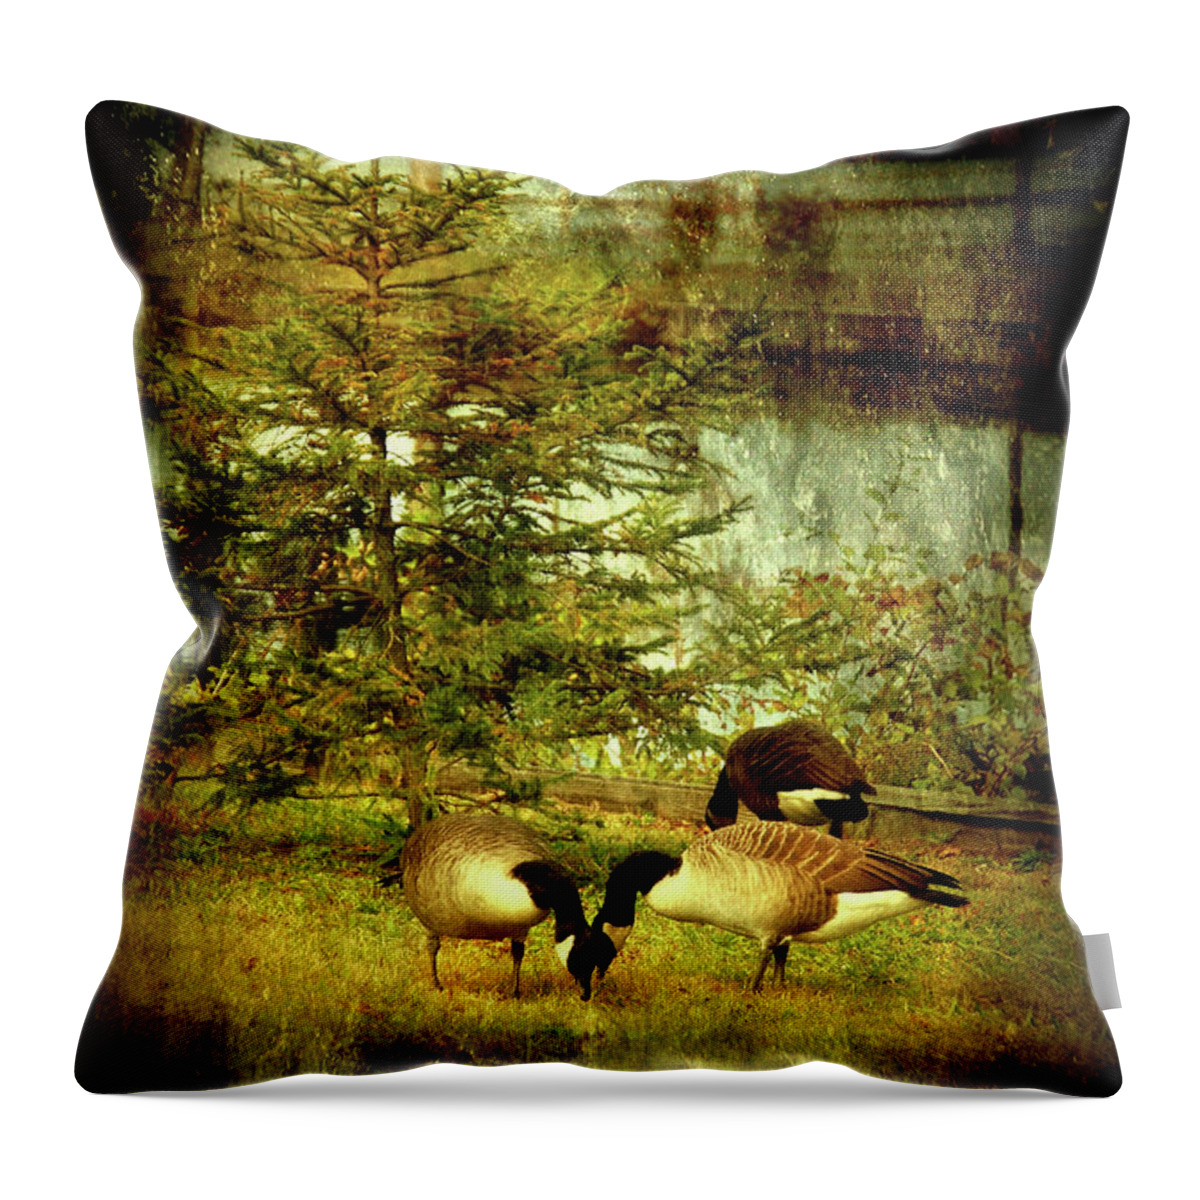 Autumn Throw Pillow featuring the photograph By The Little Tree - Lake Carasaljo by Angie Tirado